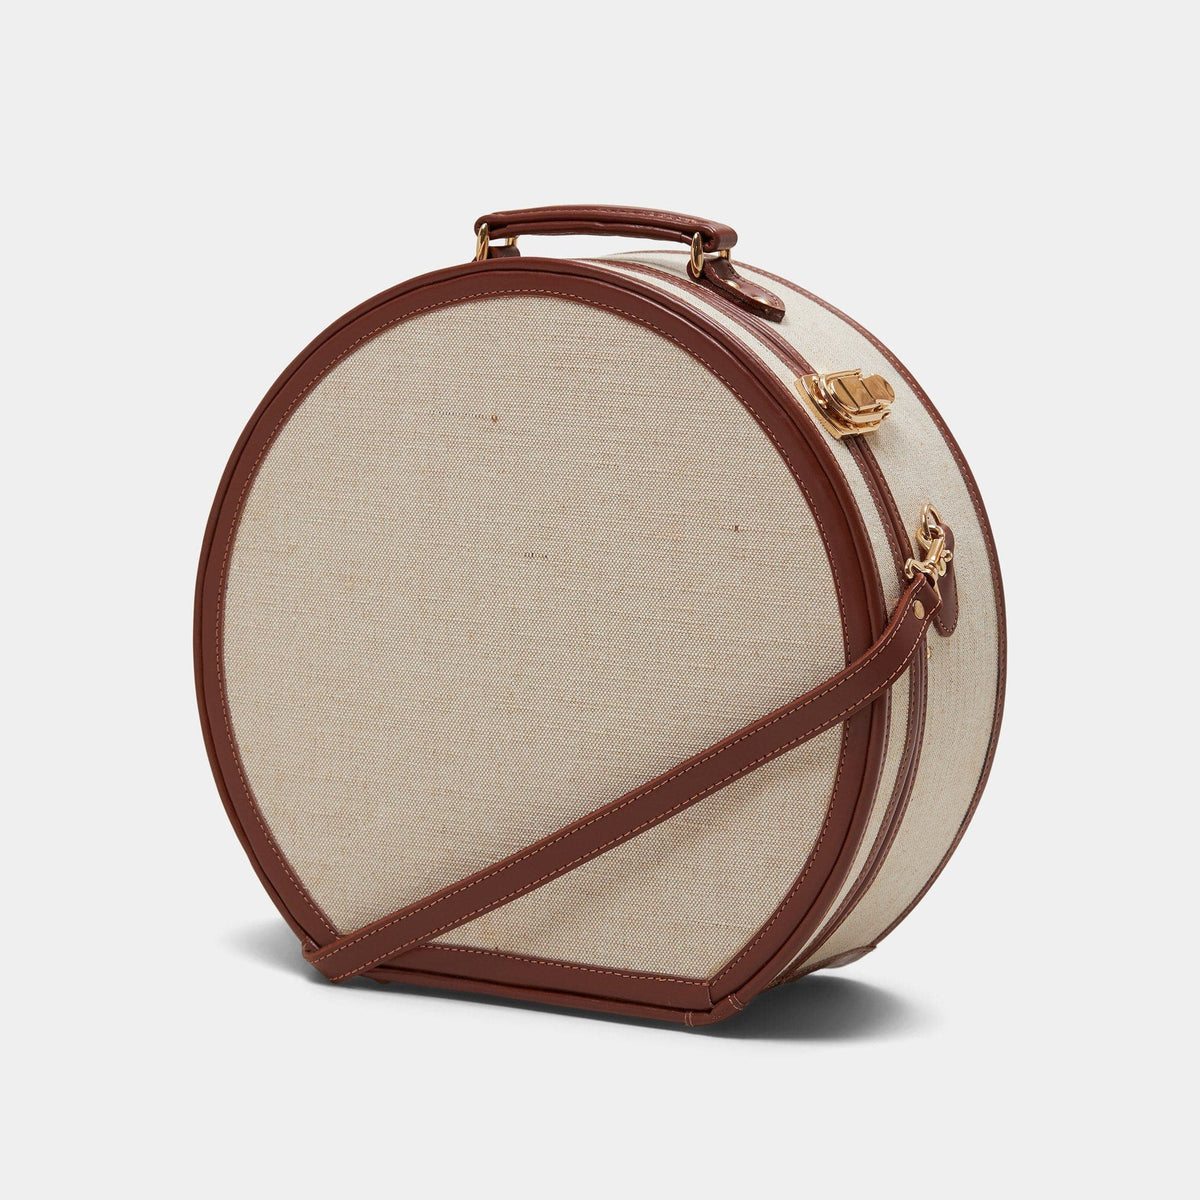 The Editor - Brown Hatbox Large Hatbox Large Steamline Luggage 